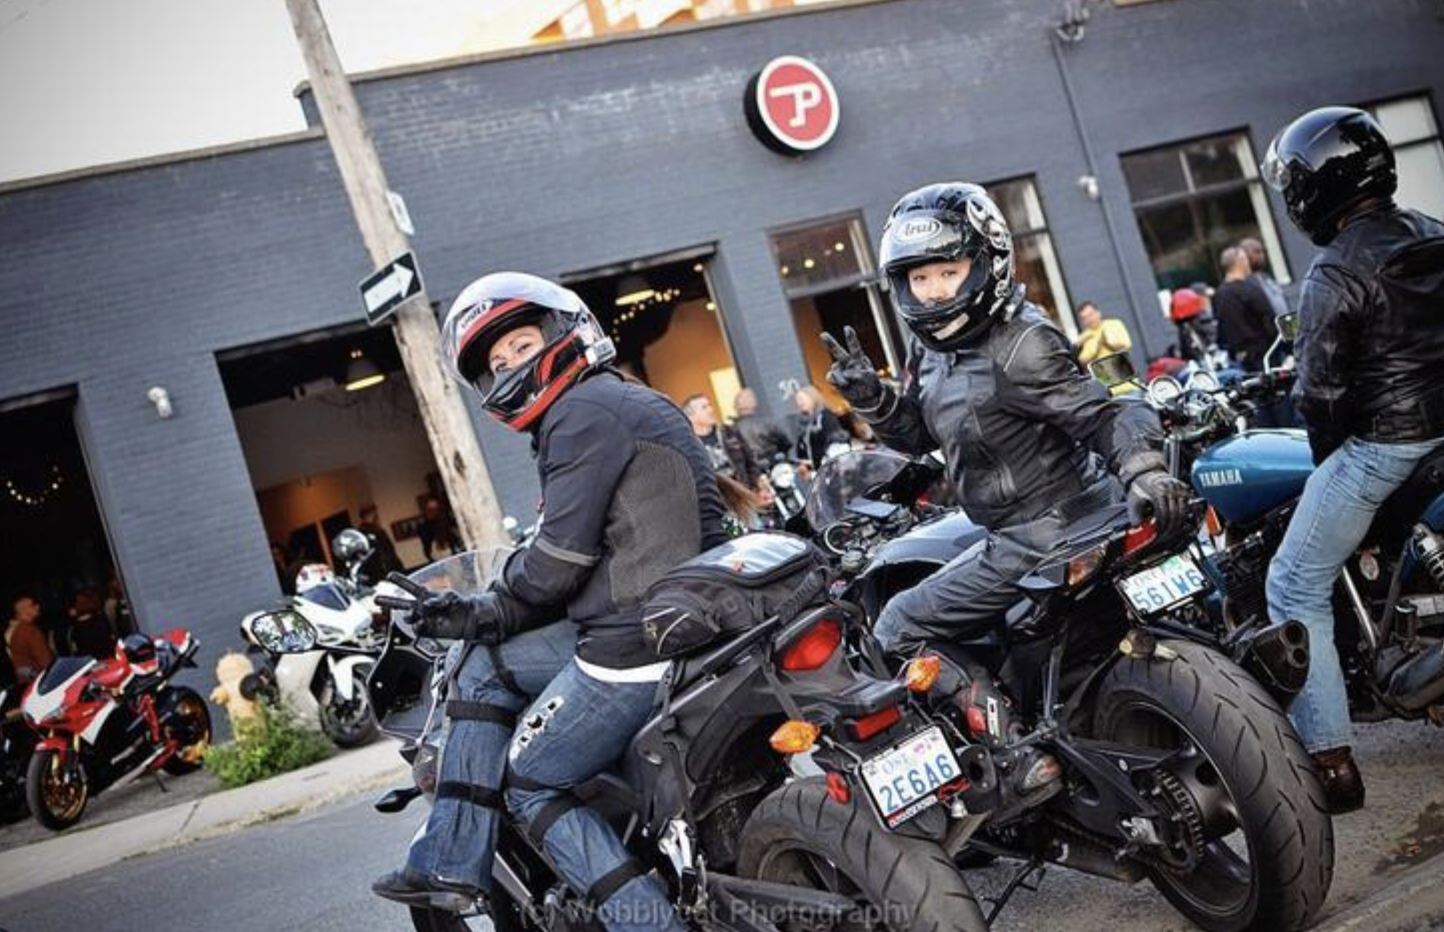 3 motorcyclists parked in front of a restaurant. Two are turned around in their seats to look at the camera.